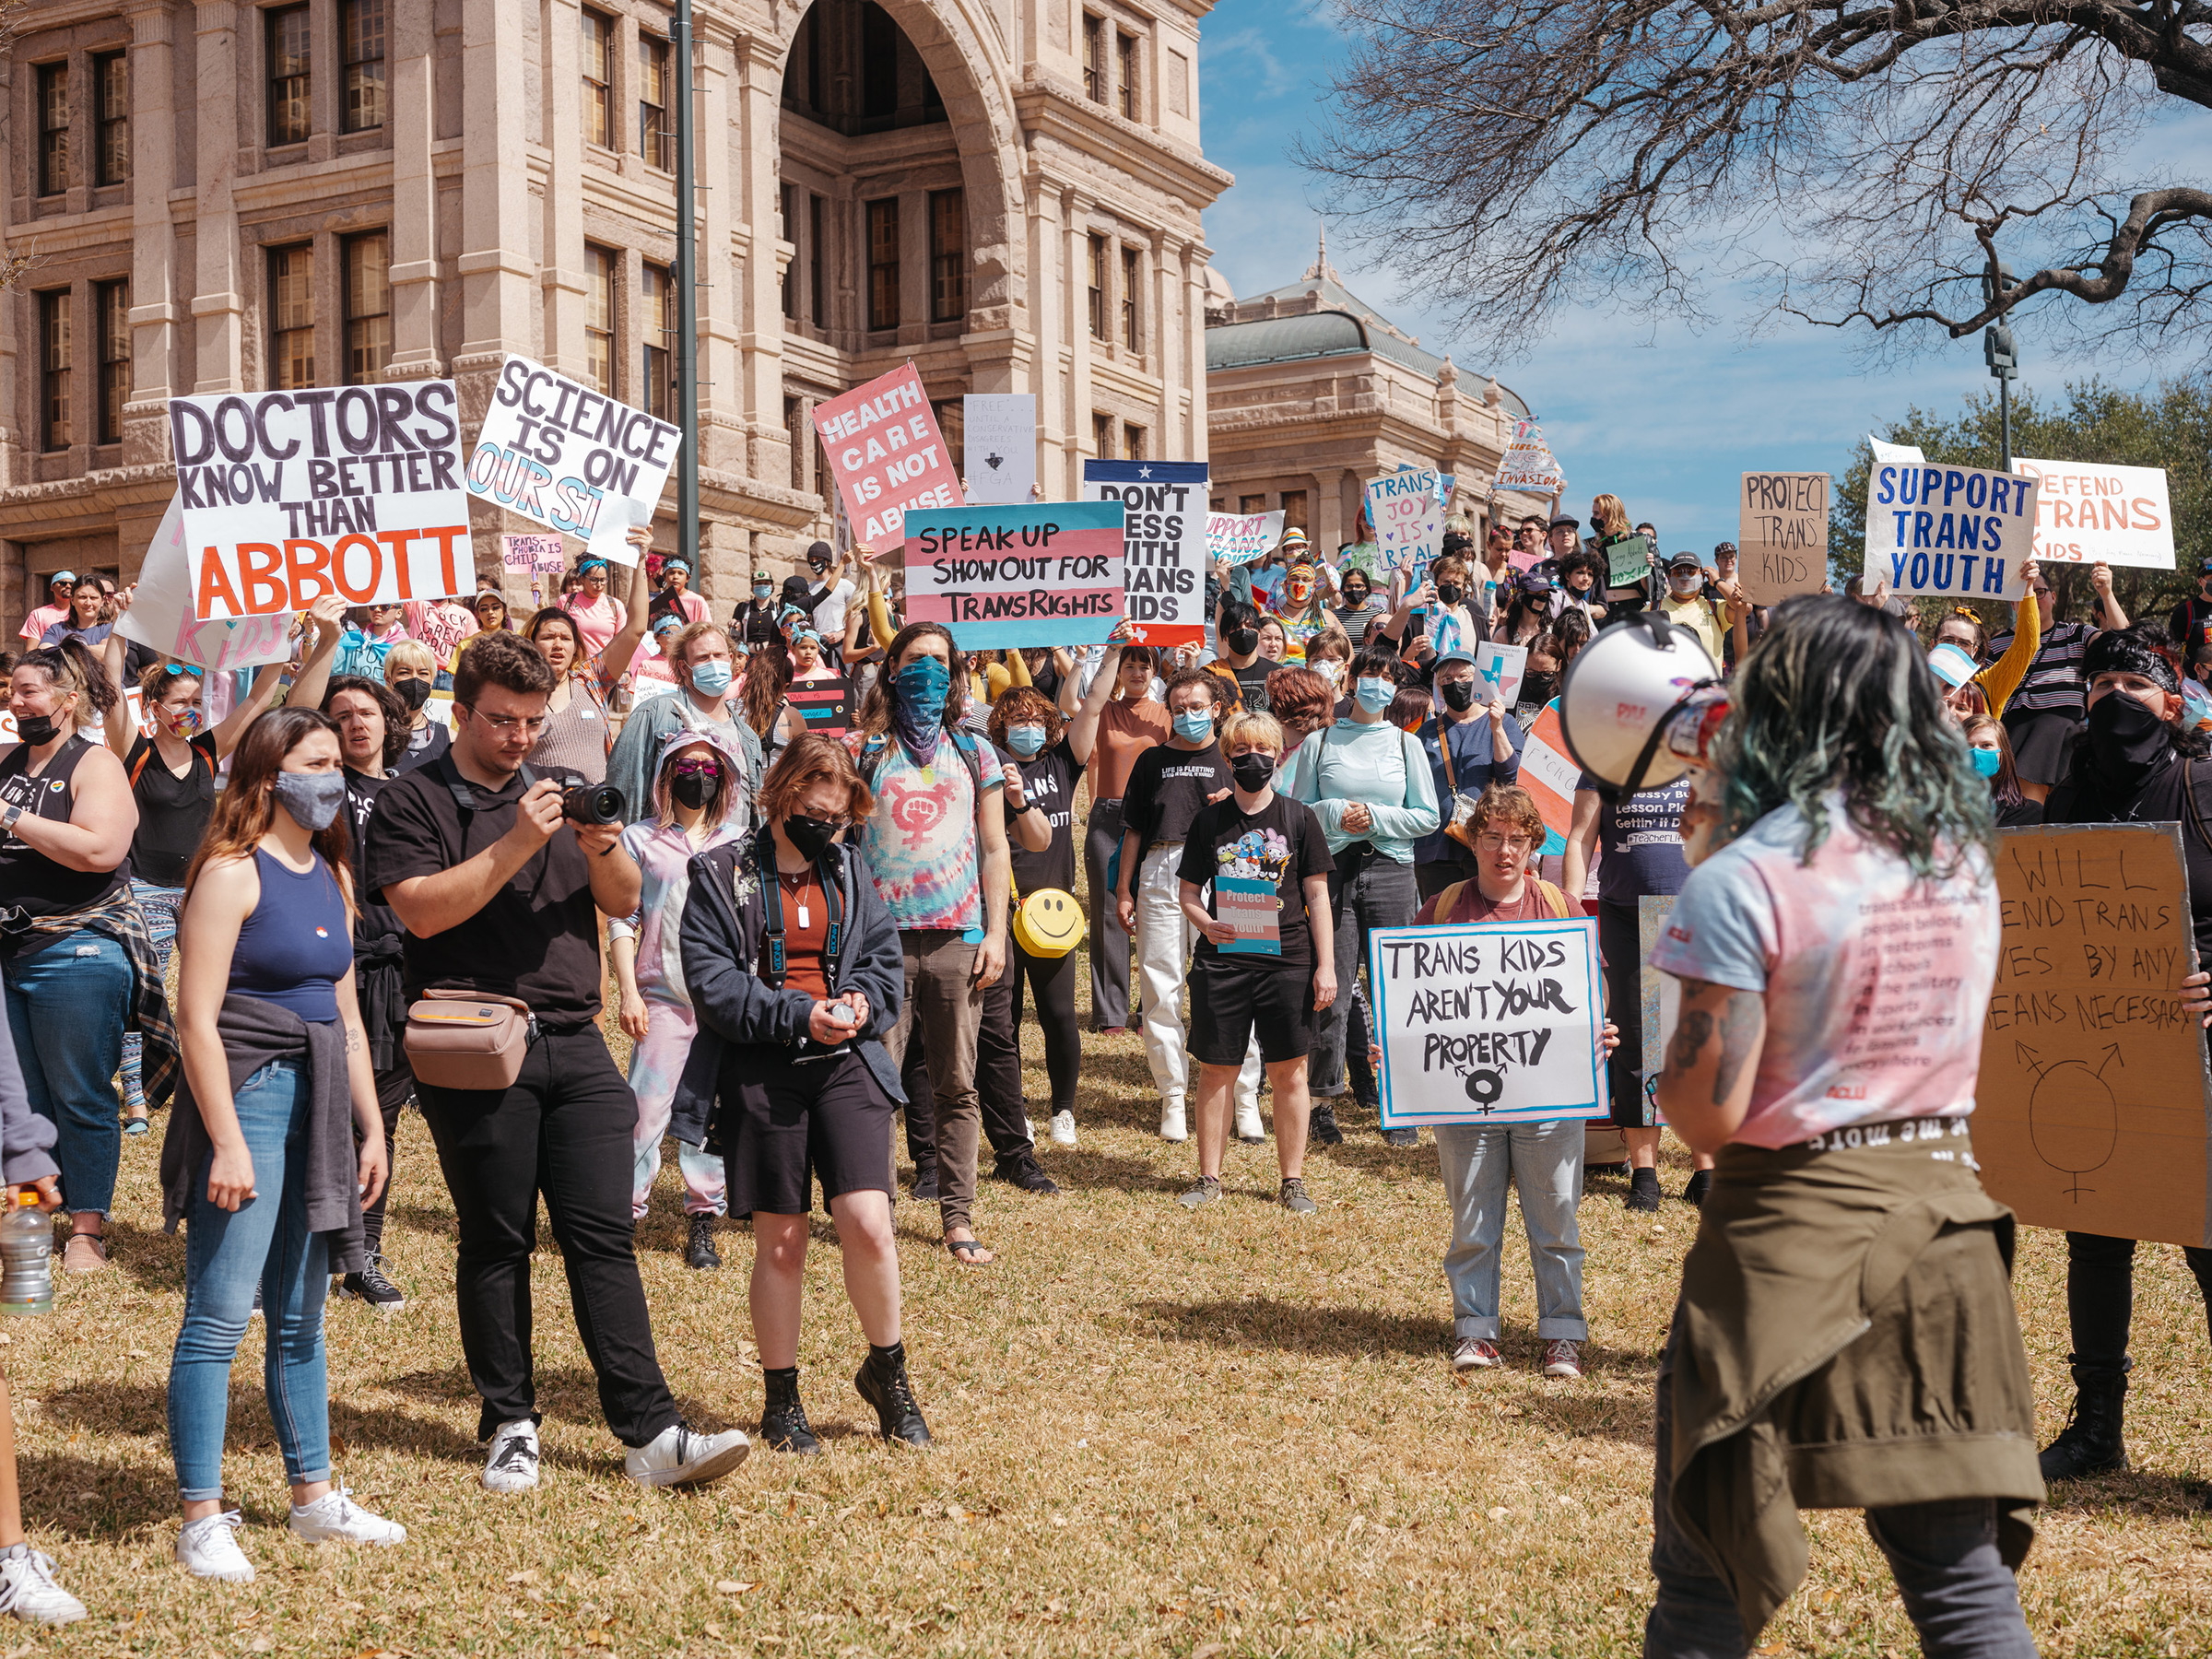 Demonstrators protest a Texas policy to regard gender-affirming treatments for transgender youth as 